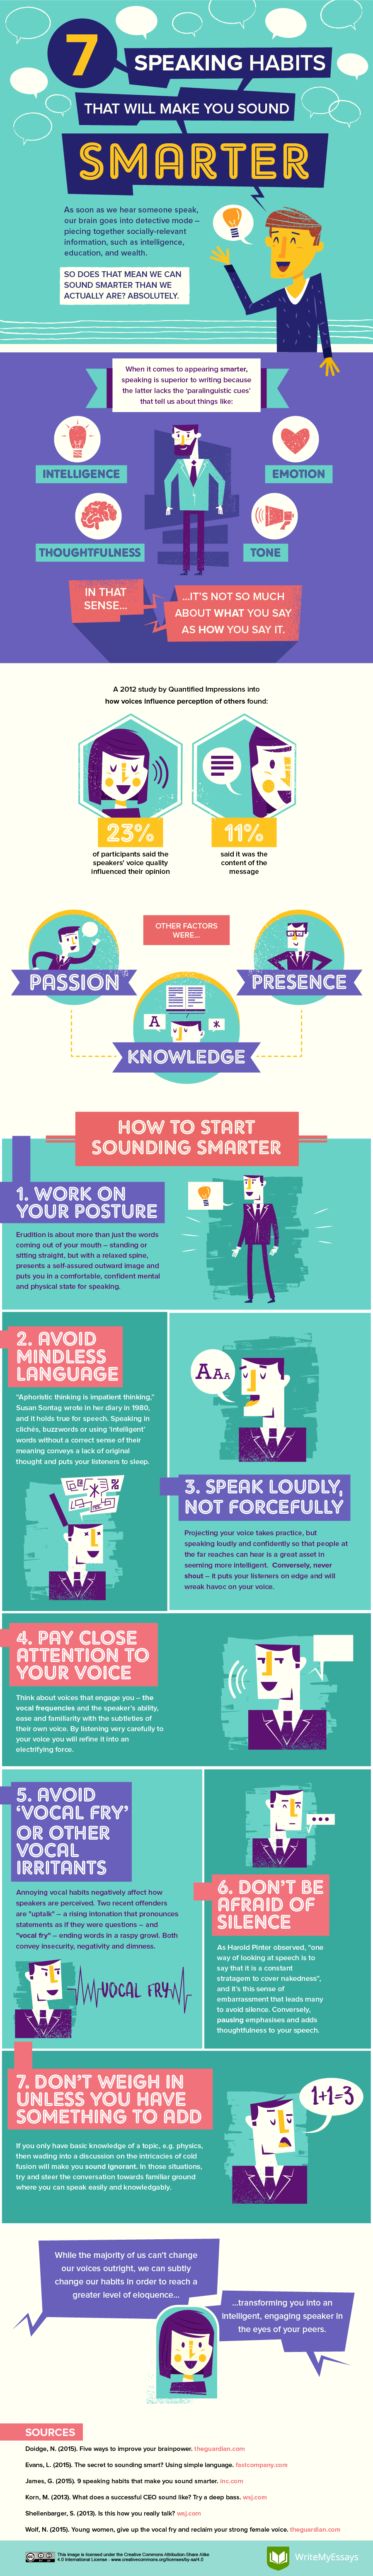 7 Speaking Habits That Will Make You Sound Smarter Infographic